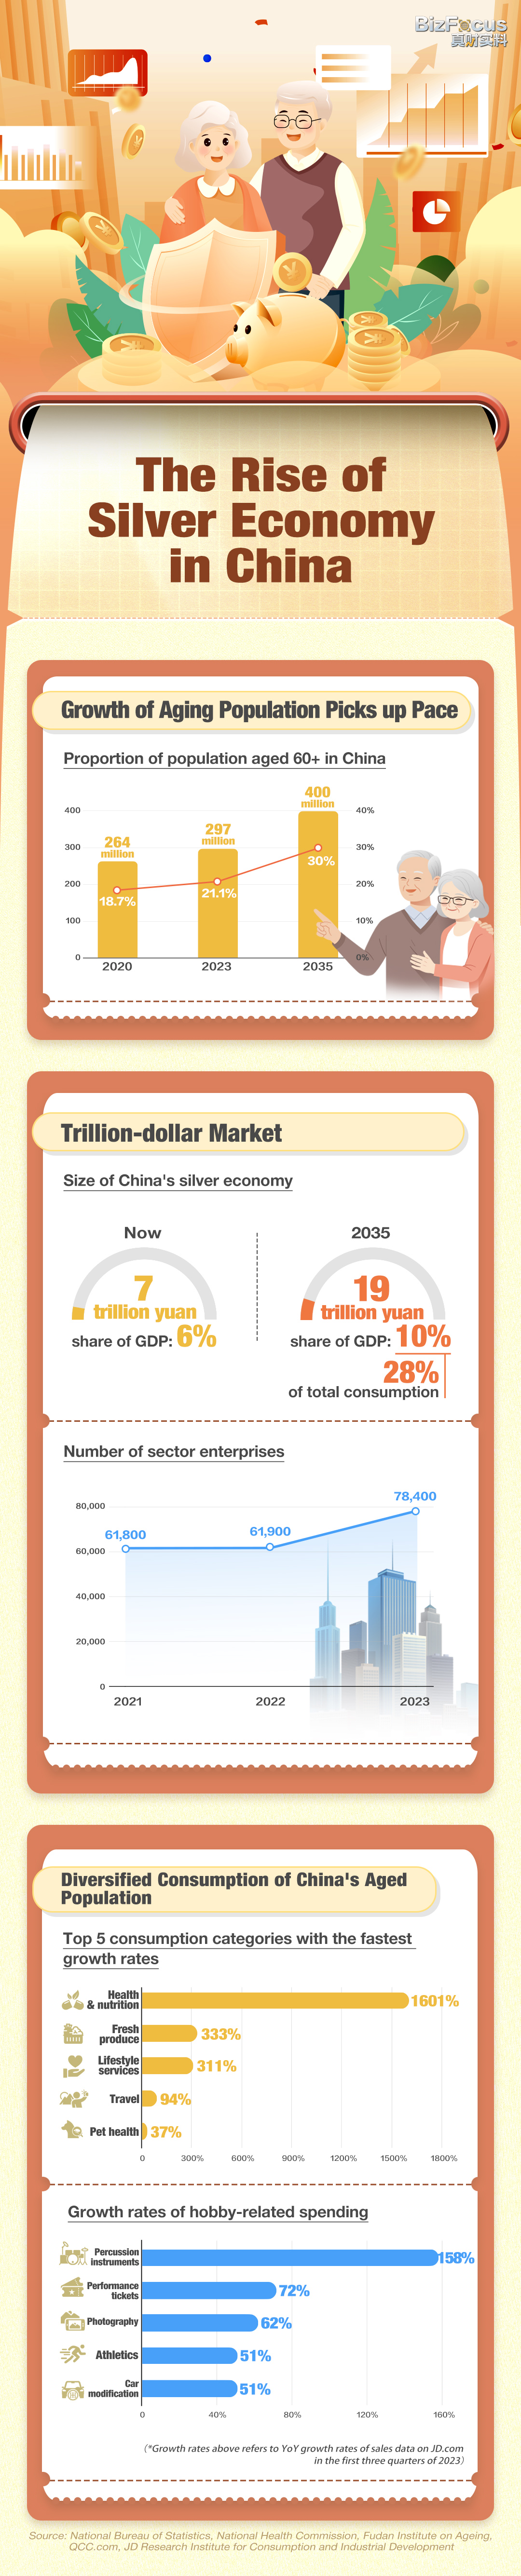 The rise of China's 'silver economy'